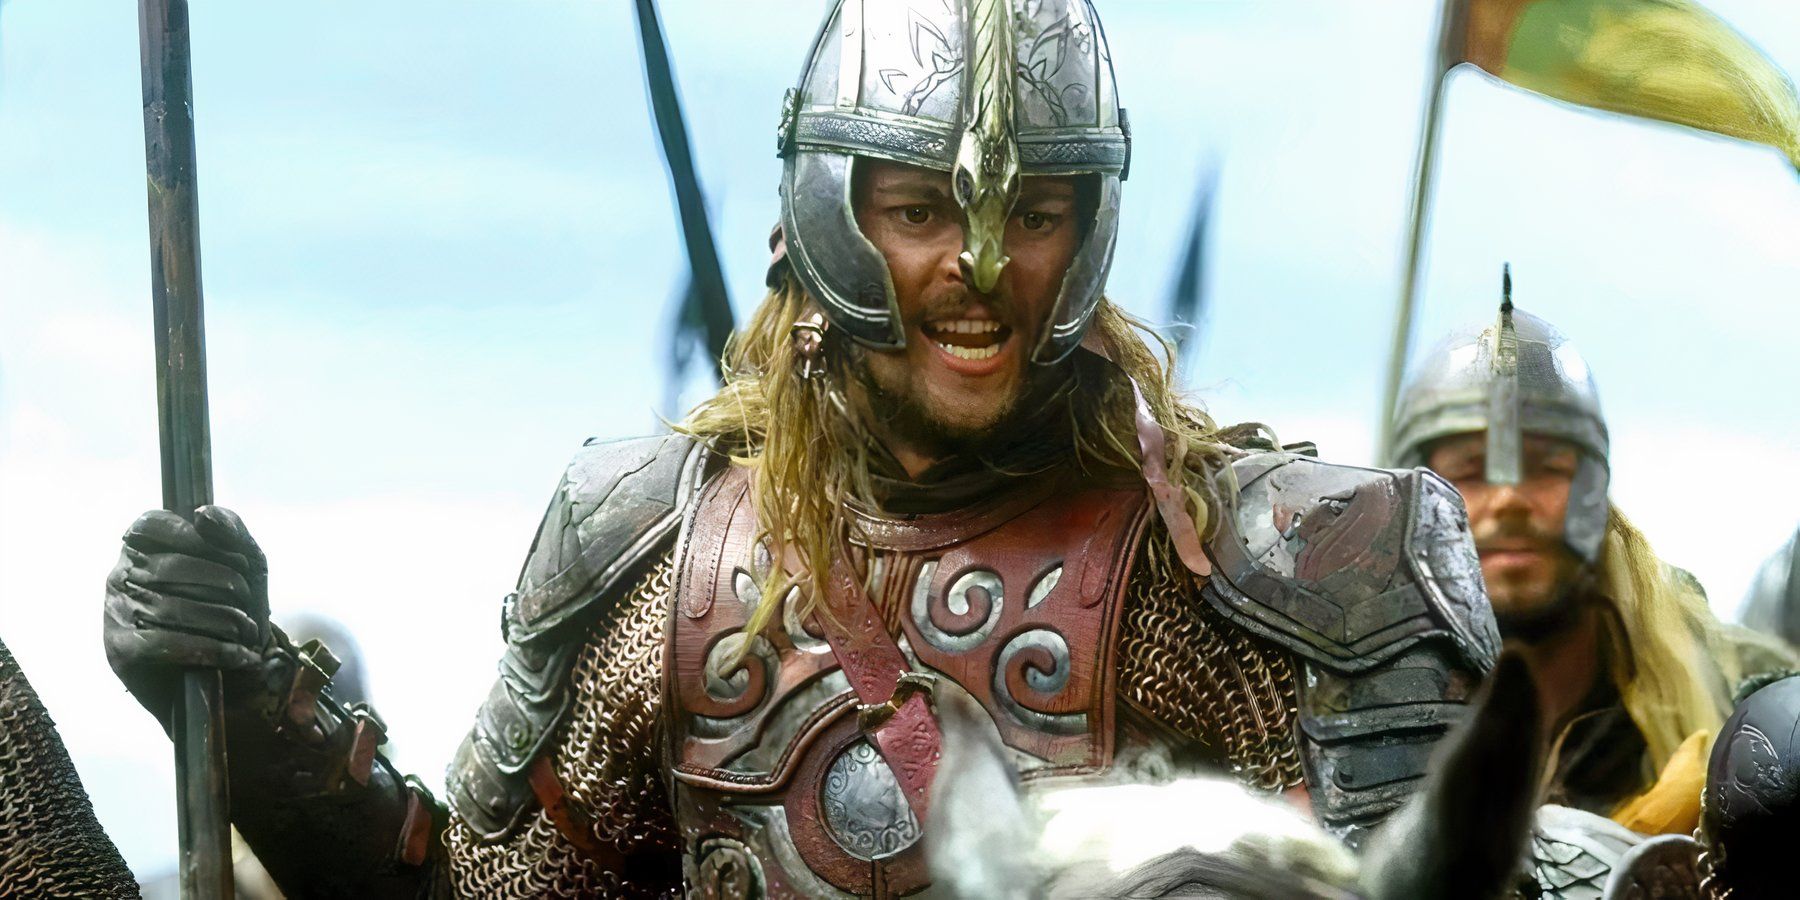 Éomer, played by Karl Urban, rides on horseback, clad in Rohan armor in The Lord of the Rings: The Two Towers.